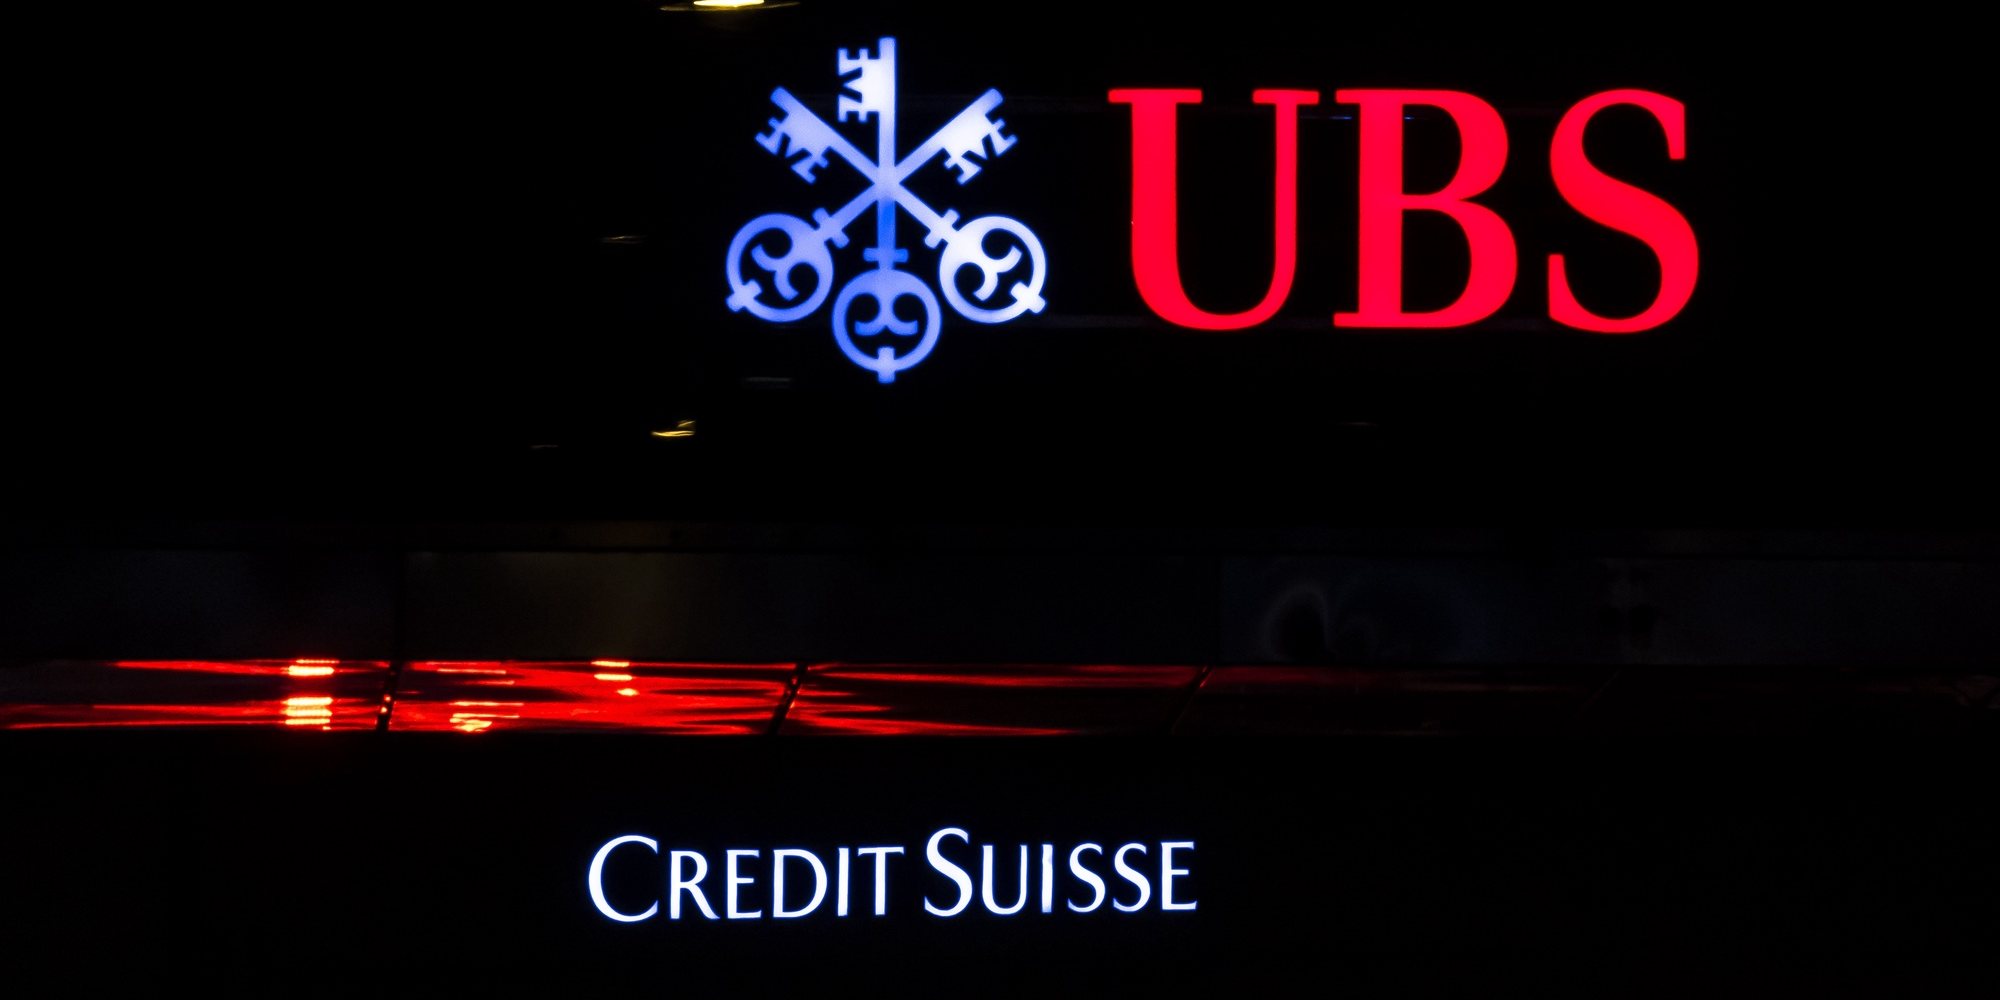 epa10529298 The illuminated logos of the Swiss banks Credit Suisse and UBS are displayed on buildings in Zurich, Switzerland, 18 March 2023. Shares of Credit Suisse lost more than one-quarter of their value on 15 March, hitting a record low after its biggest shareholder, the Saudi National Bank, told outlets that it would not inject more money into the ailing Swiss bank.  EPA/MICHAEL BUHOLZER